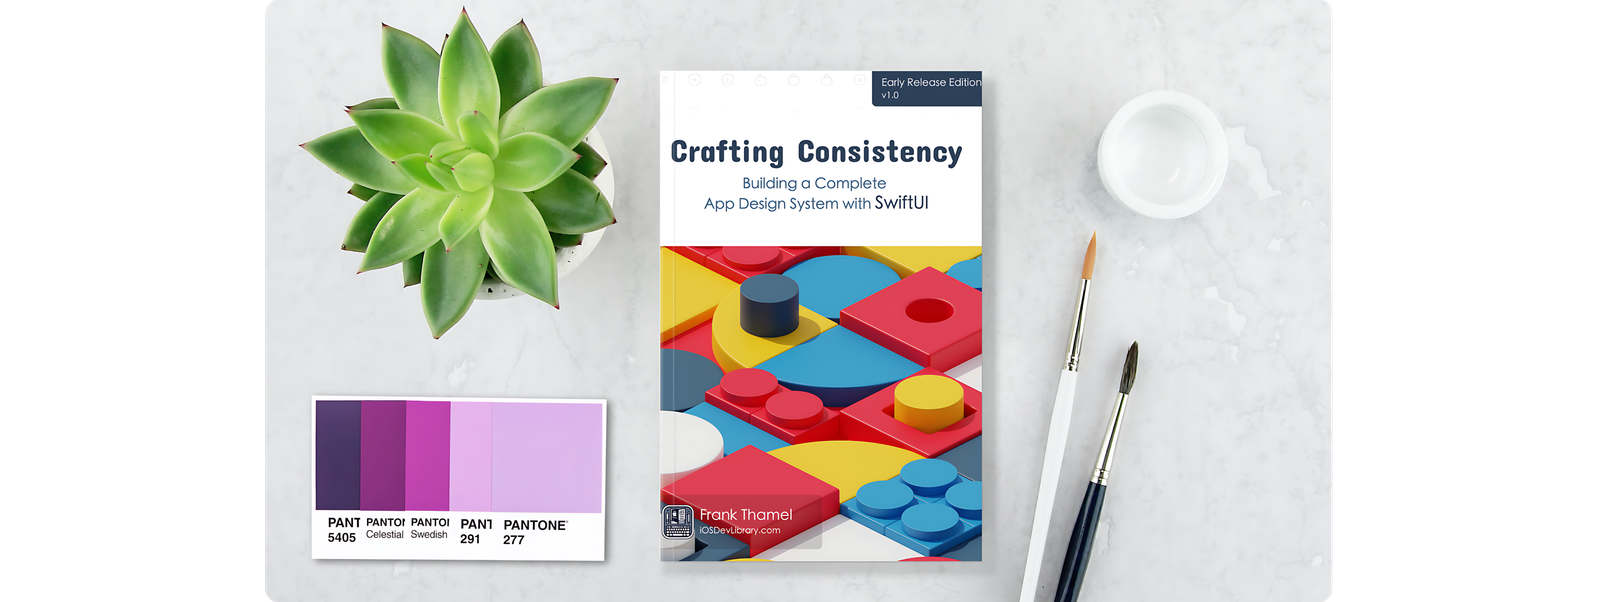 Crafting Consistency: Building a Complete App Design System with SwiftUI